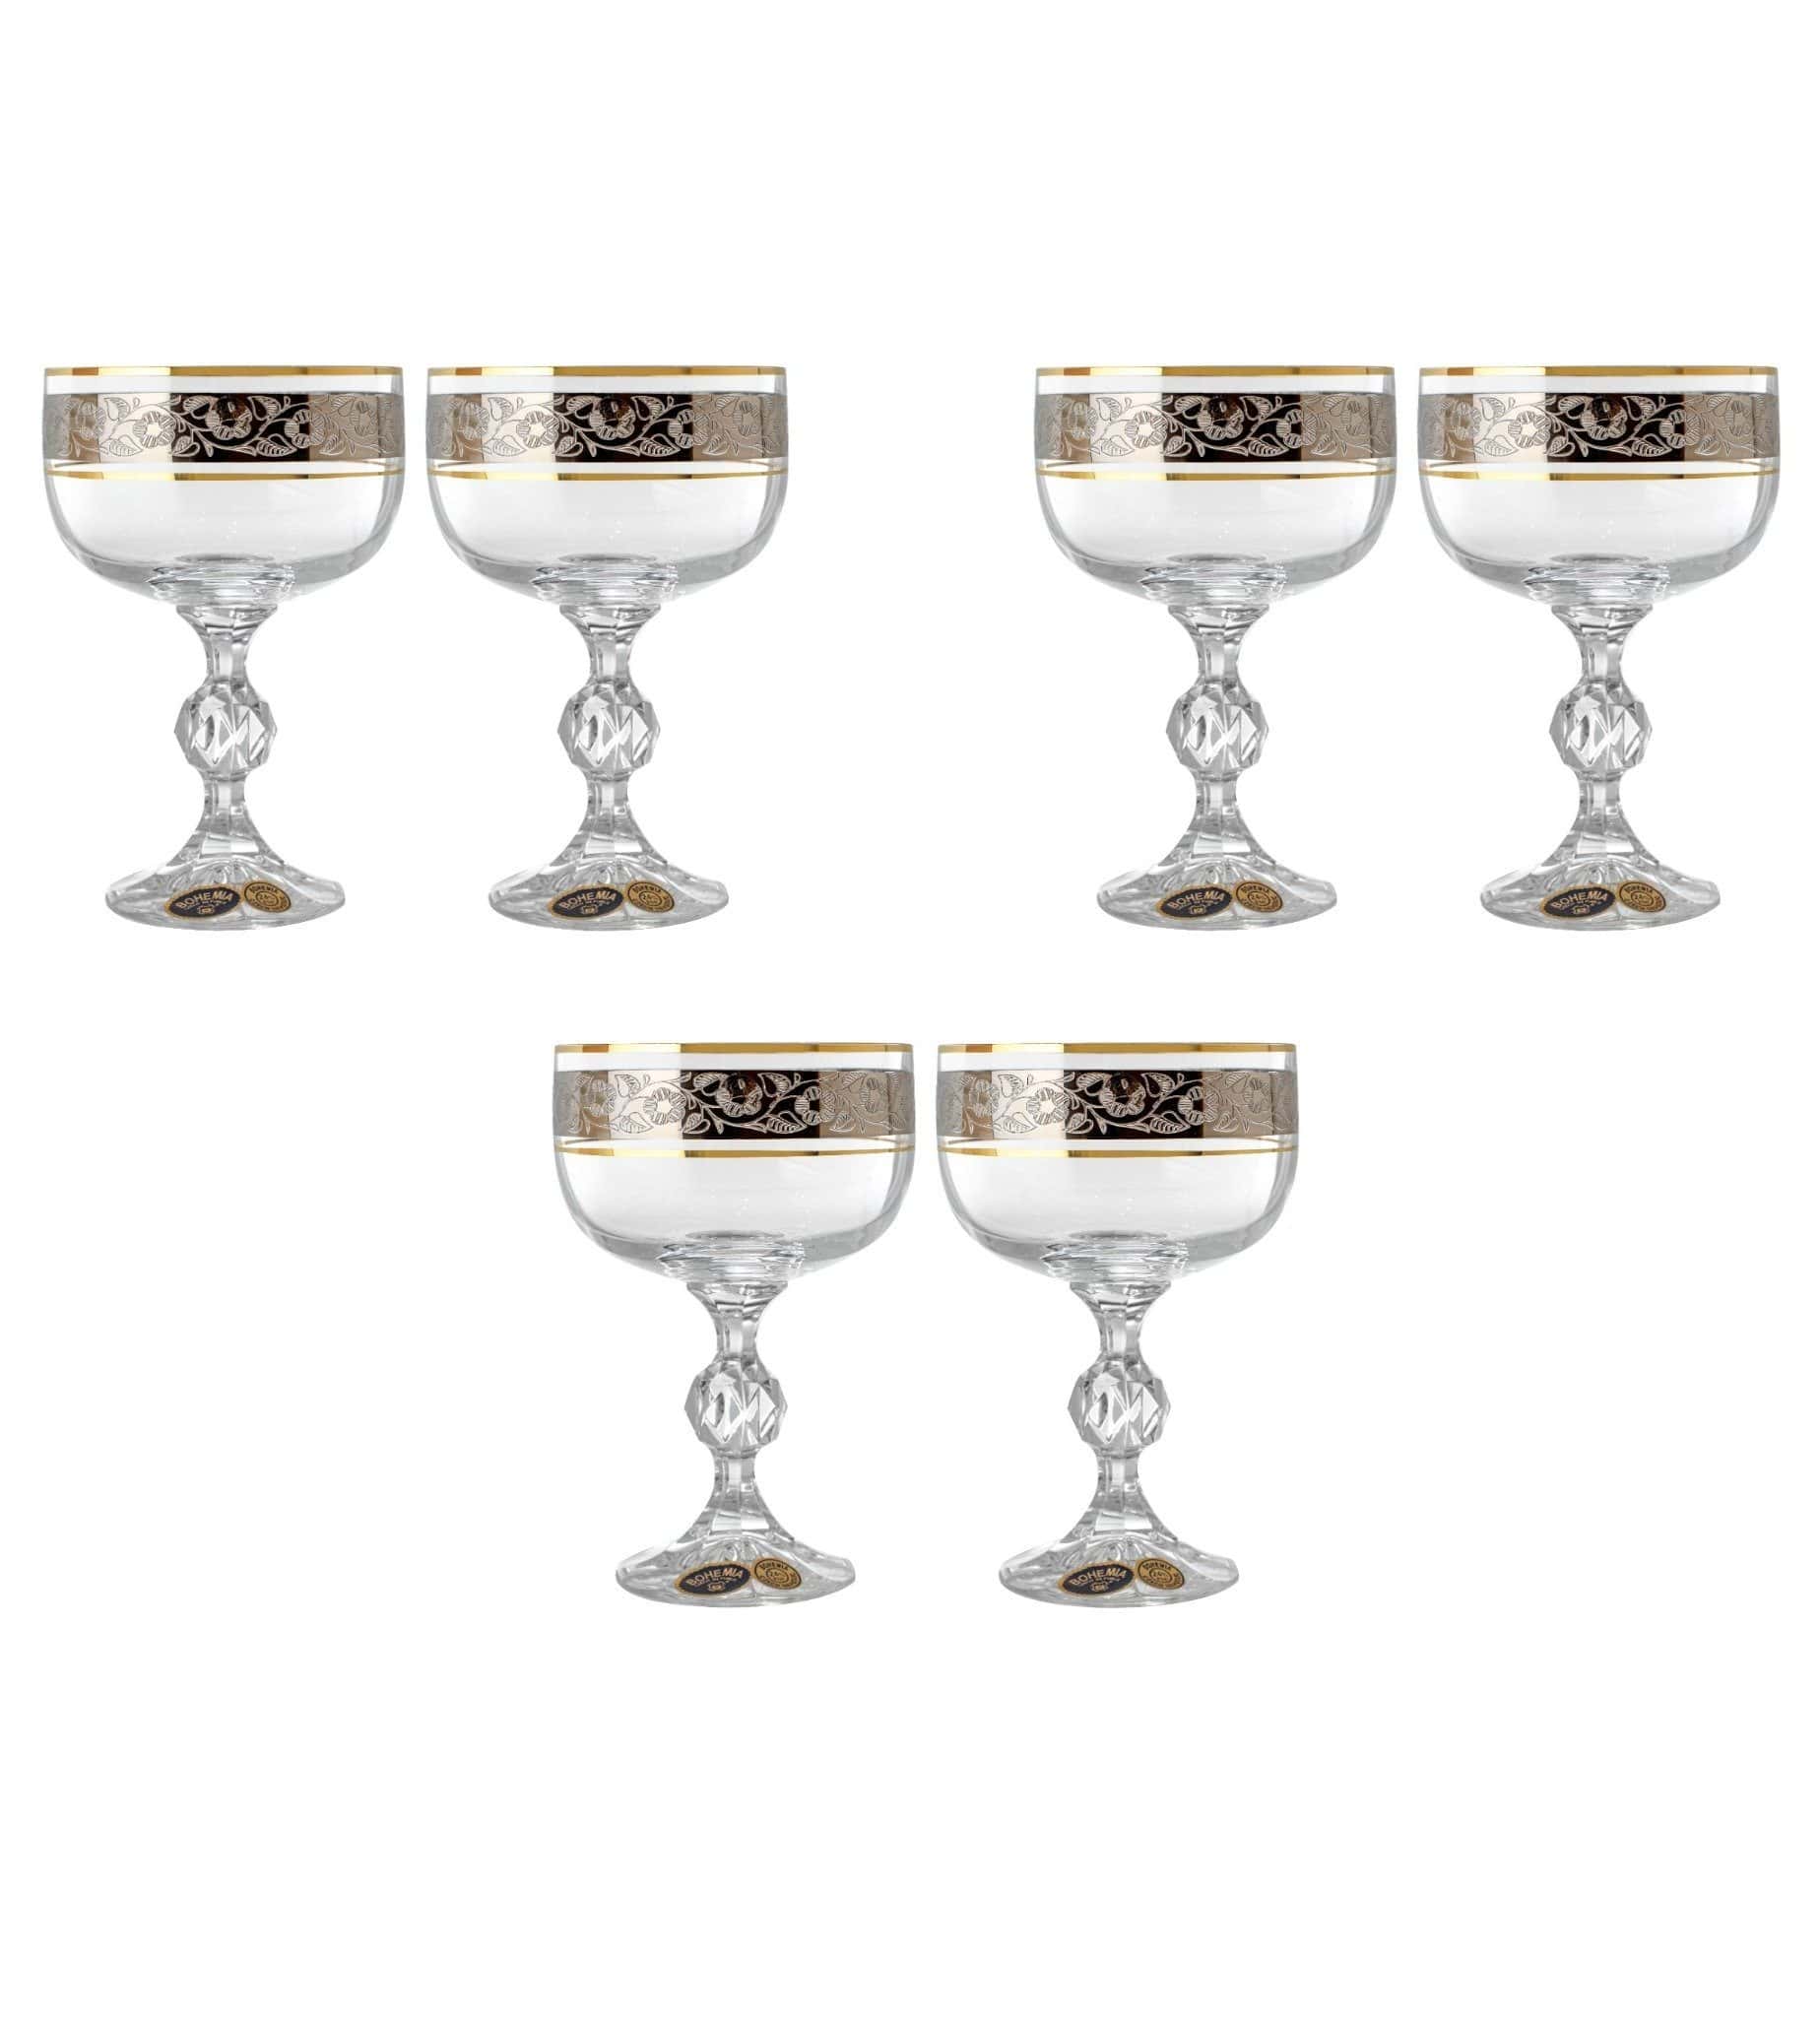 Bohemia Crystal - Cocktail Glass Set 6 Pieces - Gold & Silver - 200ml - 2700010514